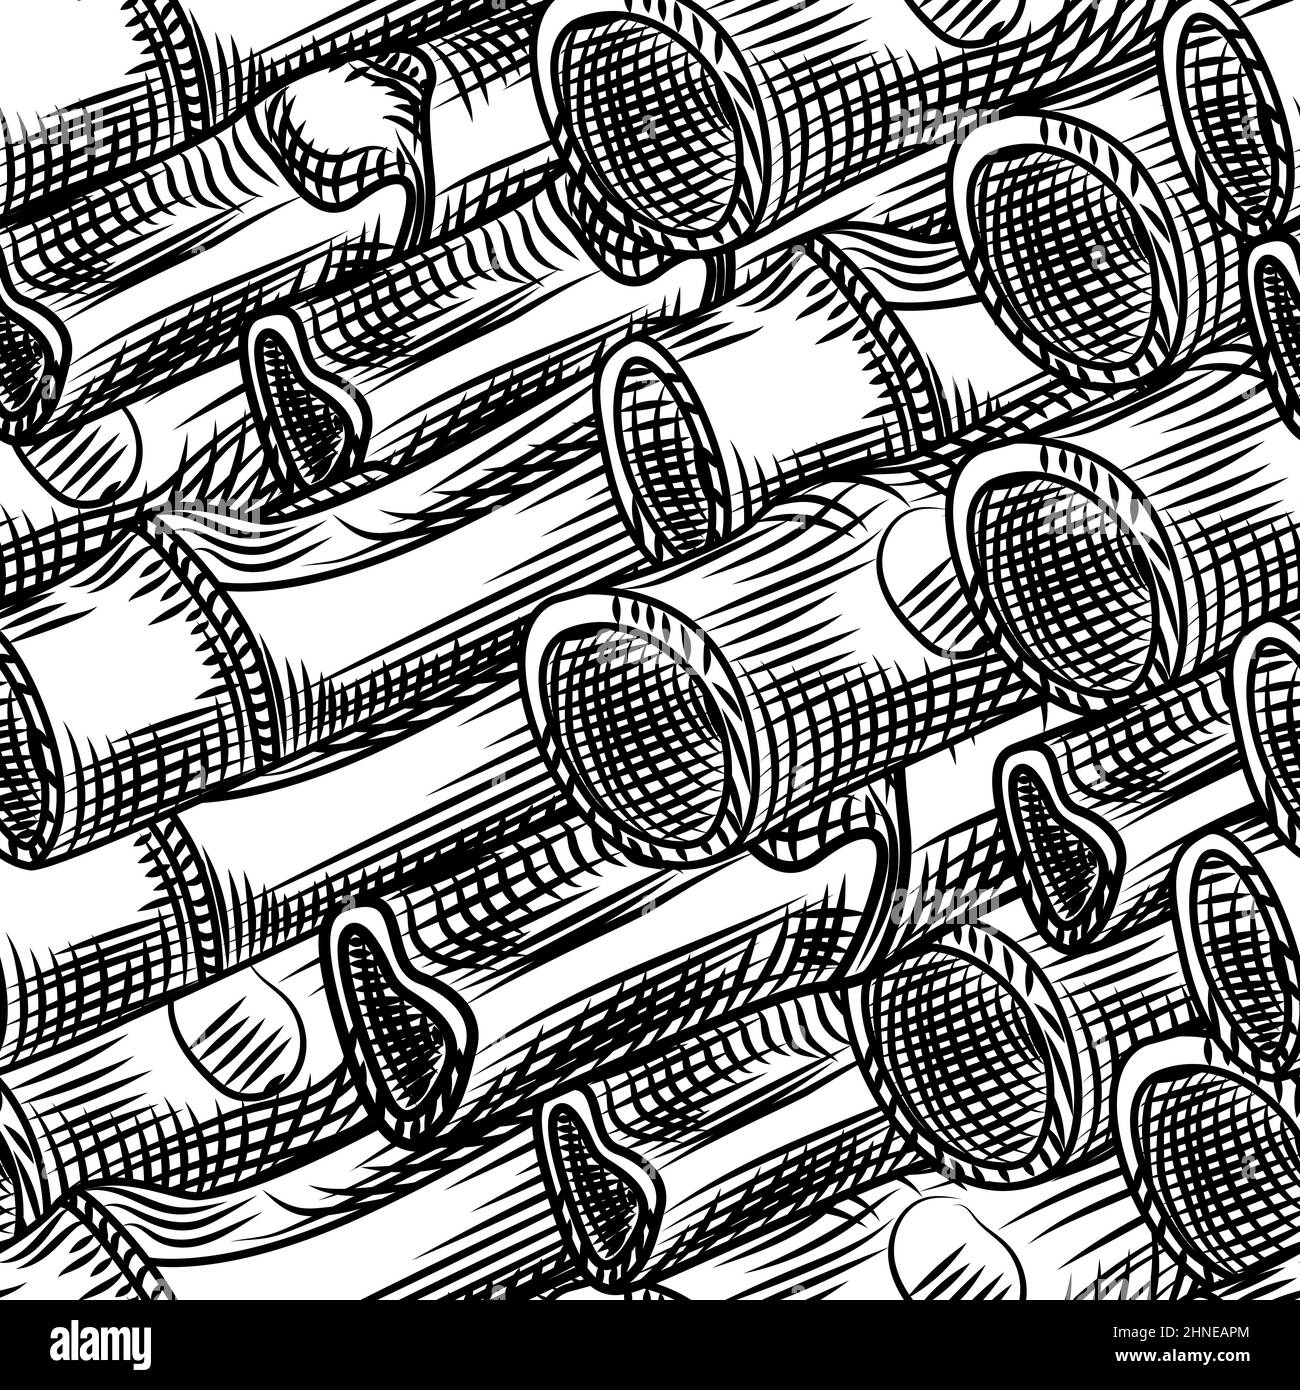 Engraved bamboo branches seamless pattern for textile design. Monochrome background. Vintage japanese style vector illustration for fabric design. Stock Vector